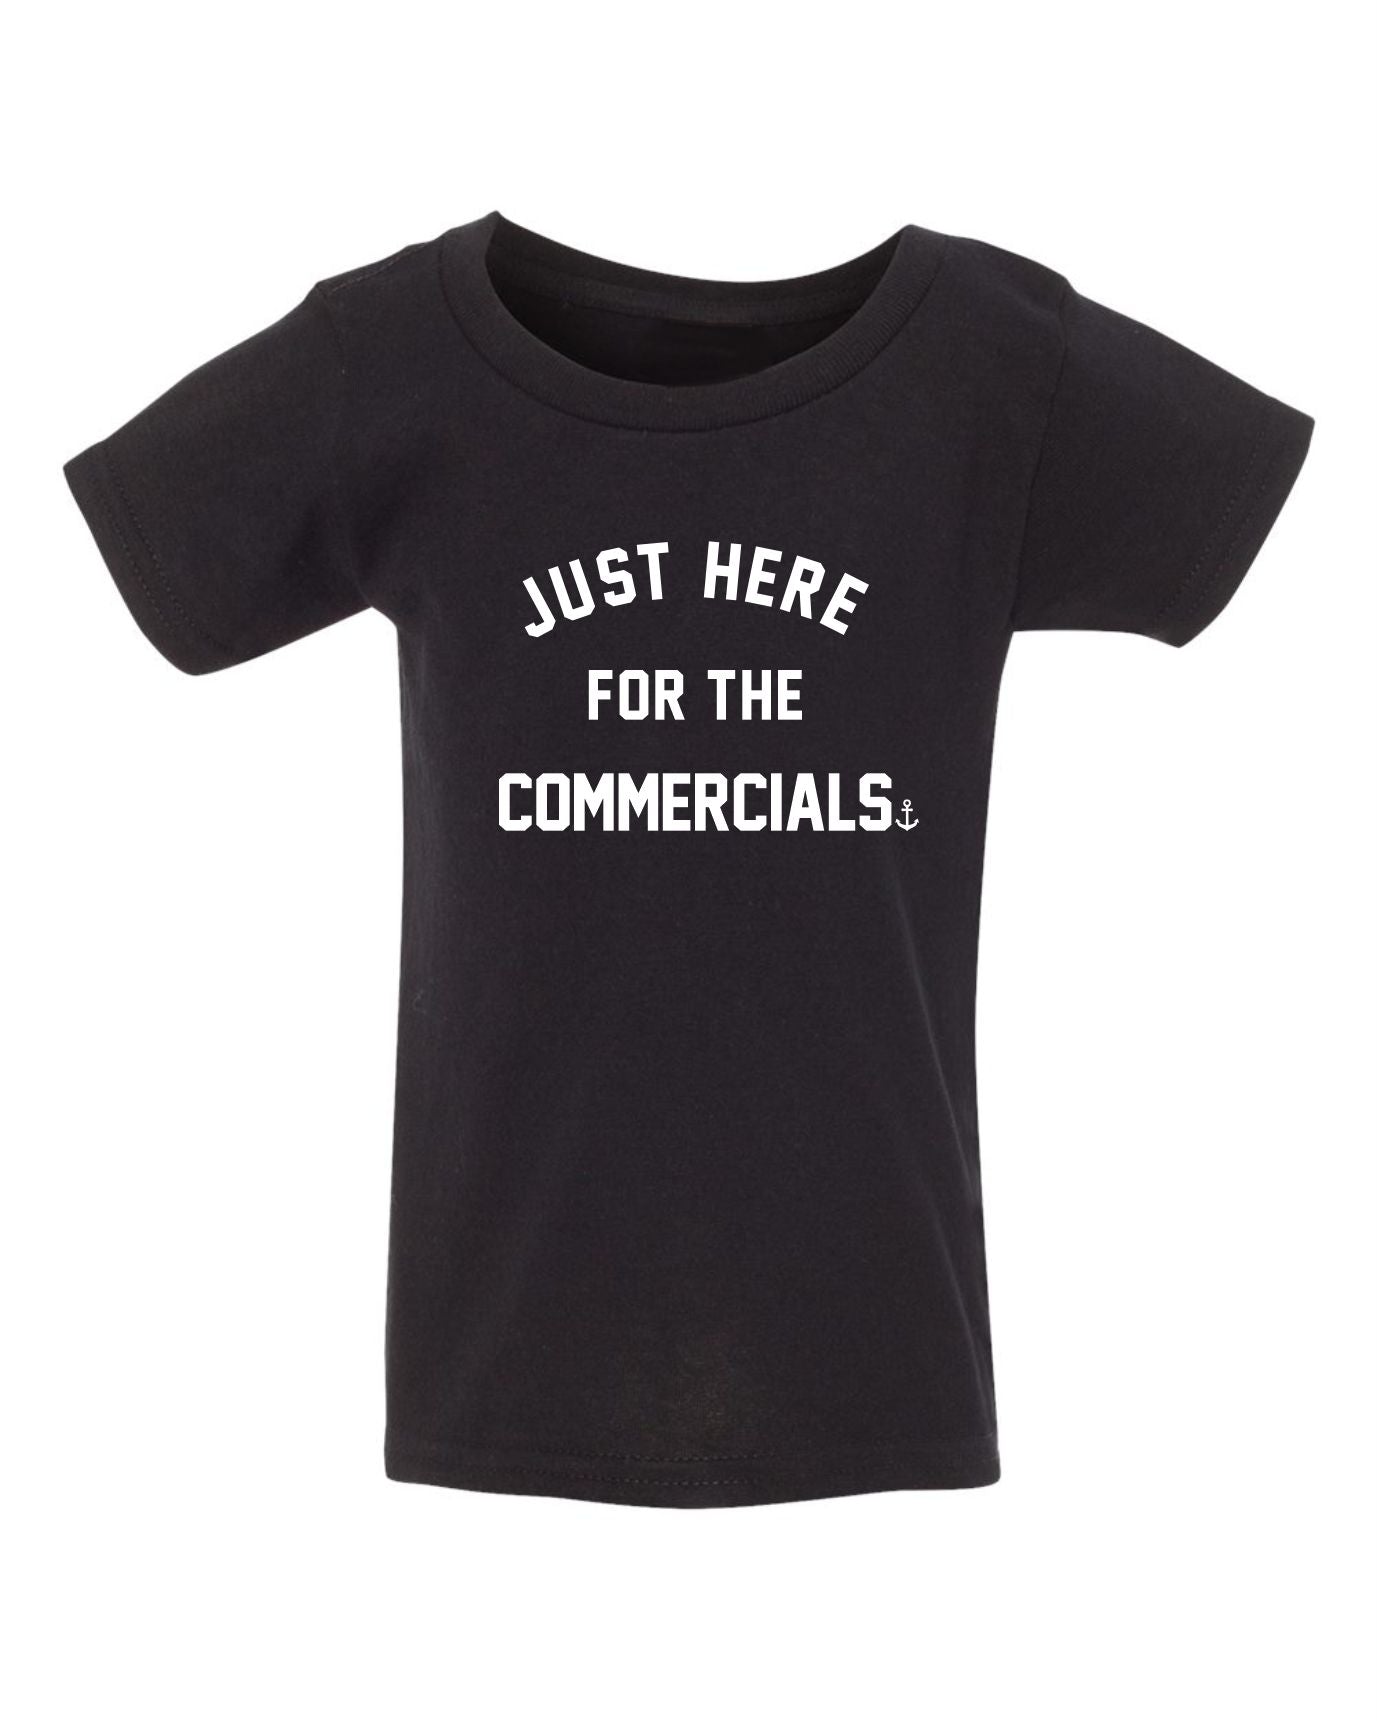 "Just Here For The Commercials" Toddler/Youth T-Shirt